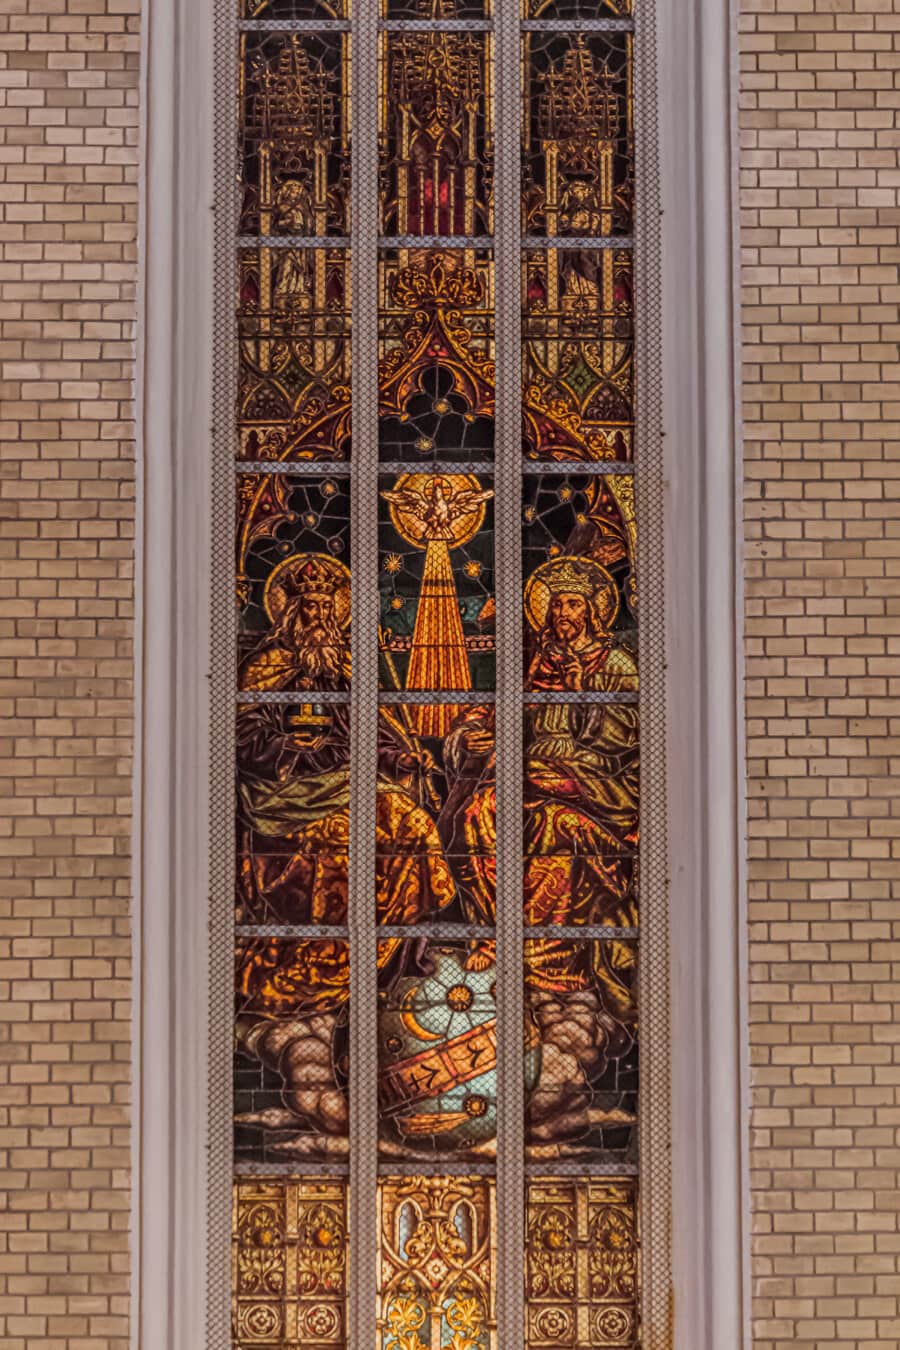 cathedral, windows, catholic, stained glass, medieval, bricks, wall, framework, architecture, religion